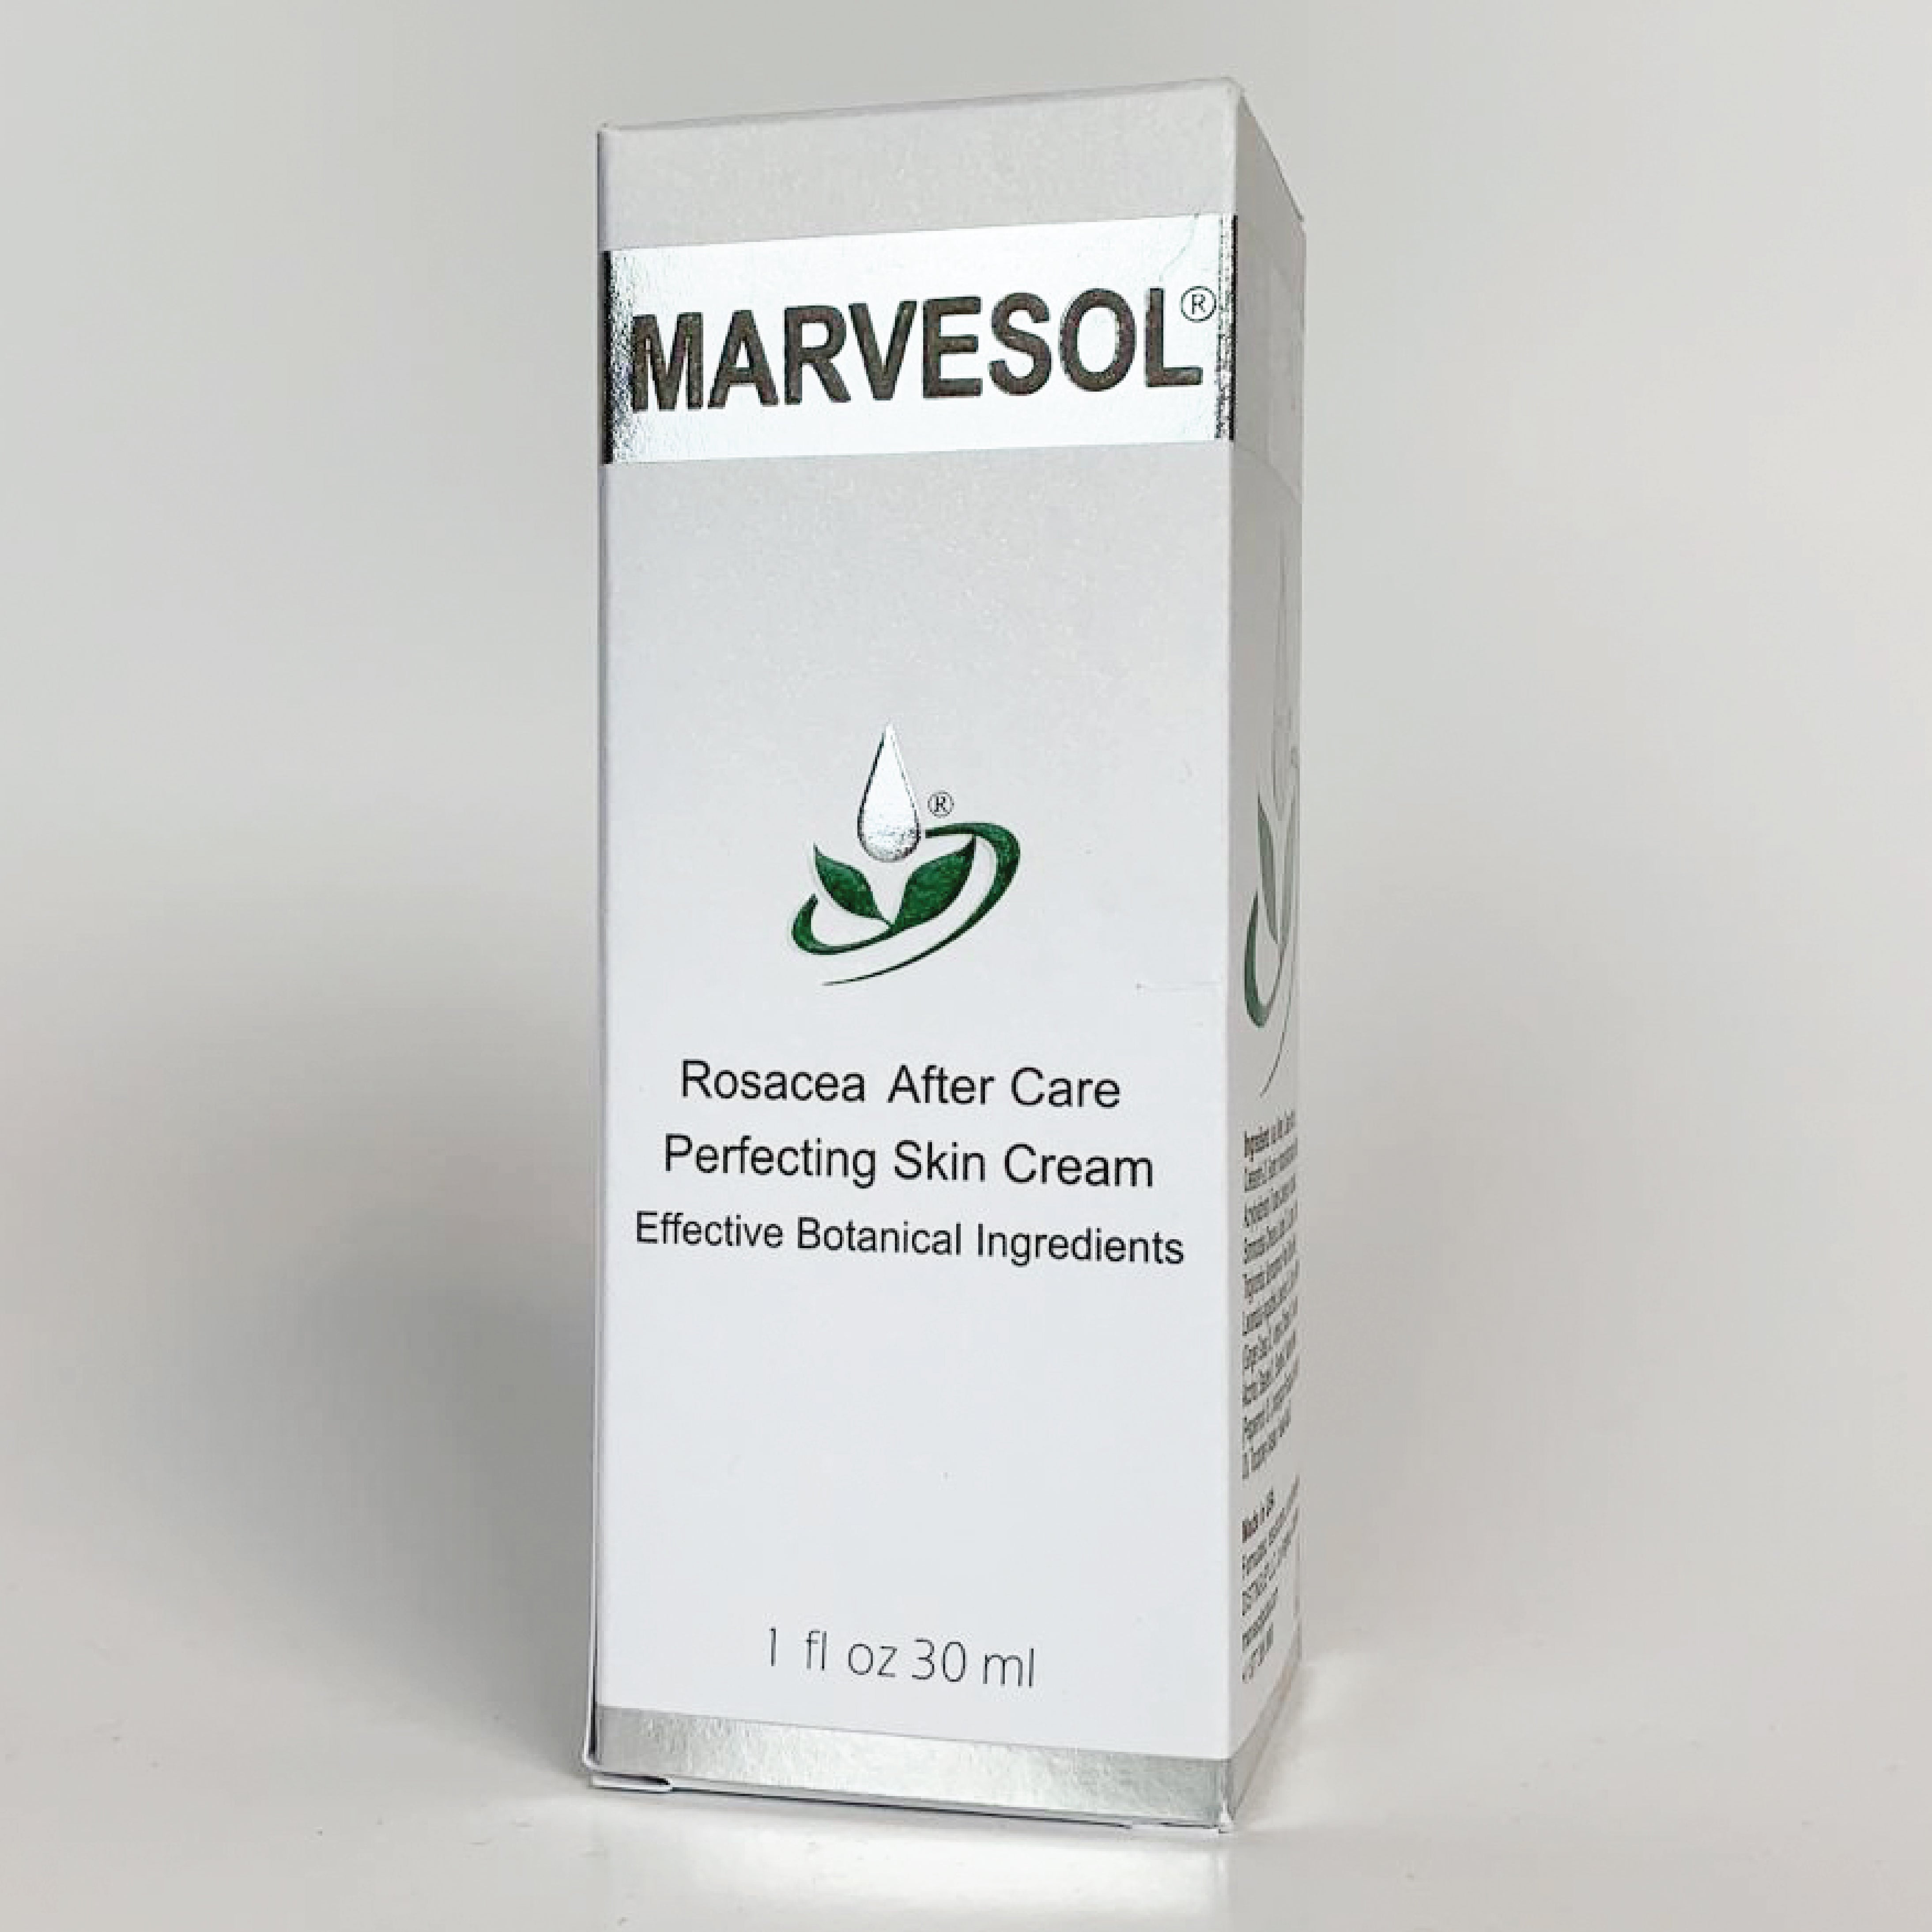 Two Marvesol Rosacea After care cream